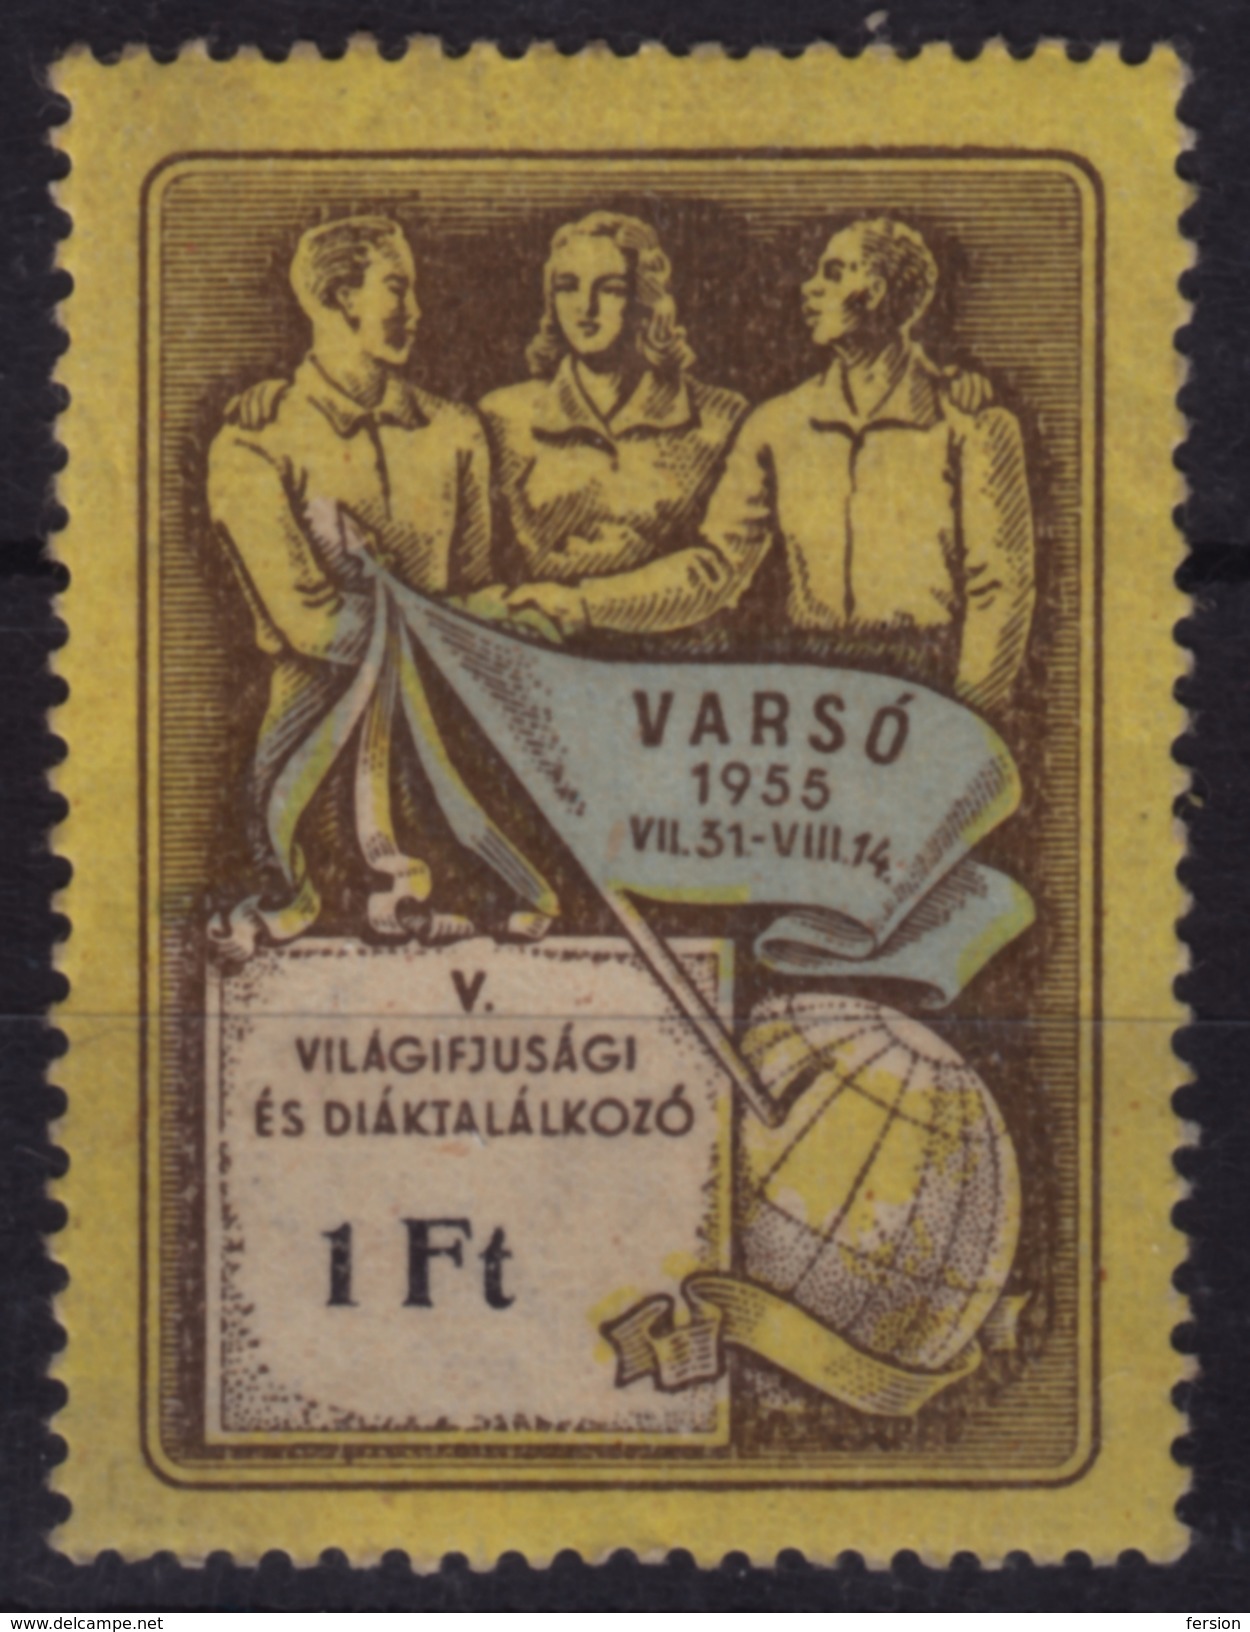 Cinderella Vignette Label Member Charity Stamp World Youth Organisation Congress / POLAND Warsaw - 1 Ft 1955 Hungary - Officials